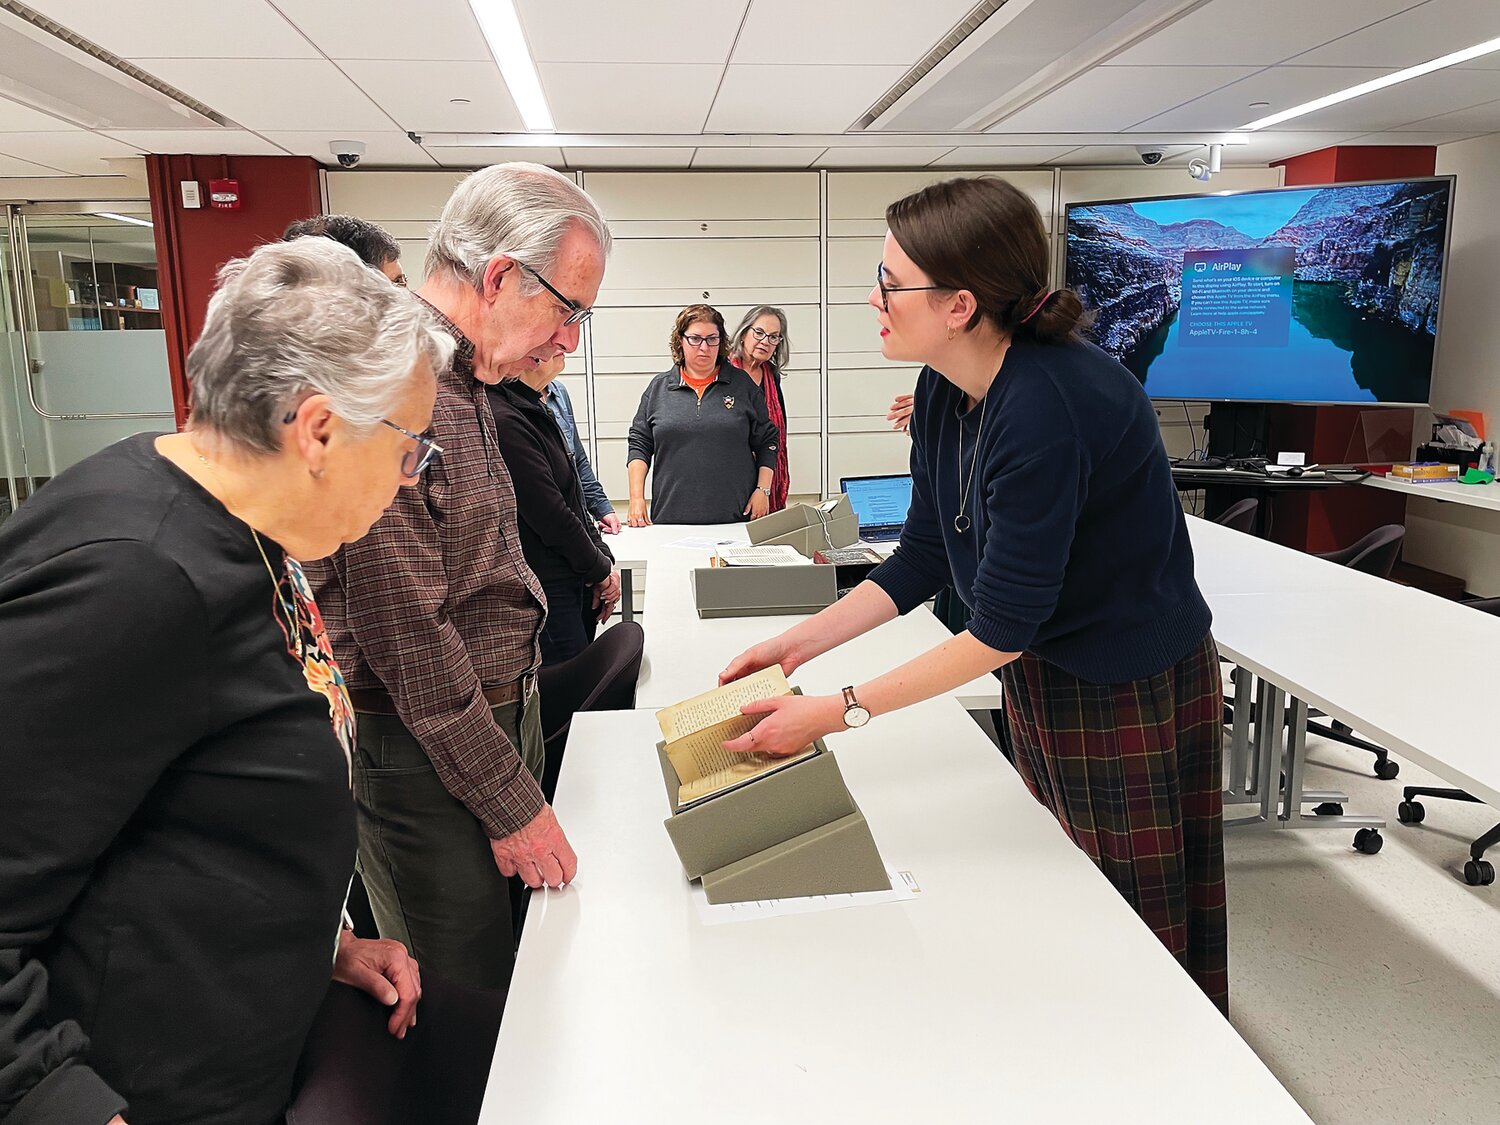 Emma Sarconi, outreach and reference professional for Special Collections at Princeton University Library, describes ancient texts to KHN members.